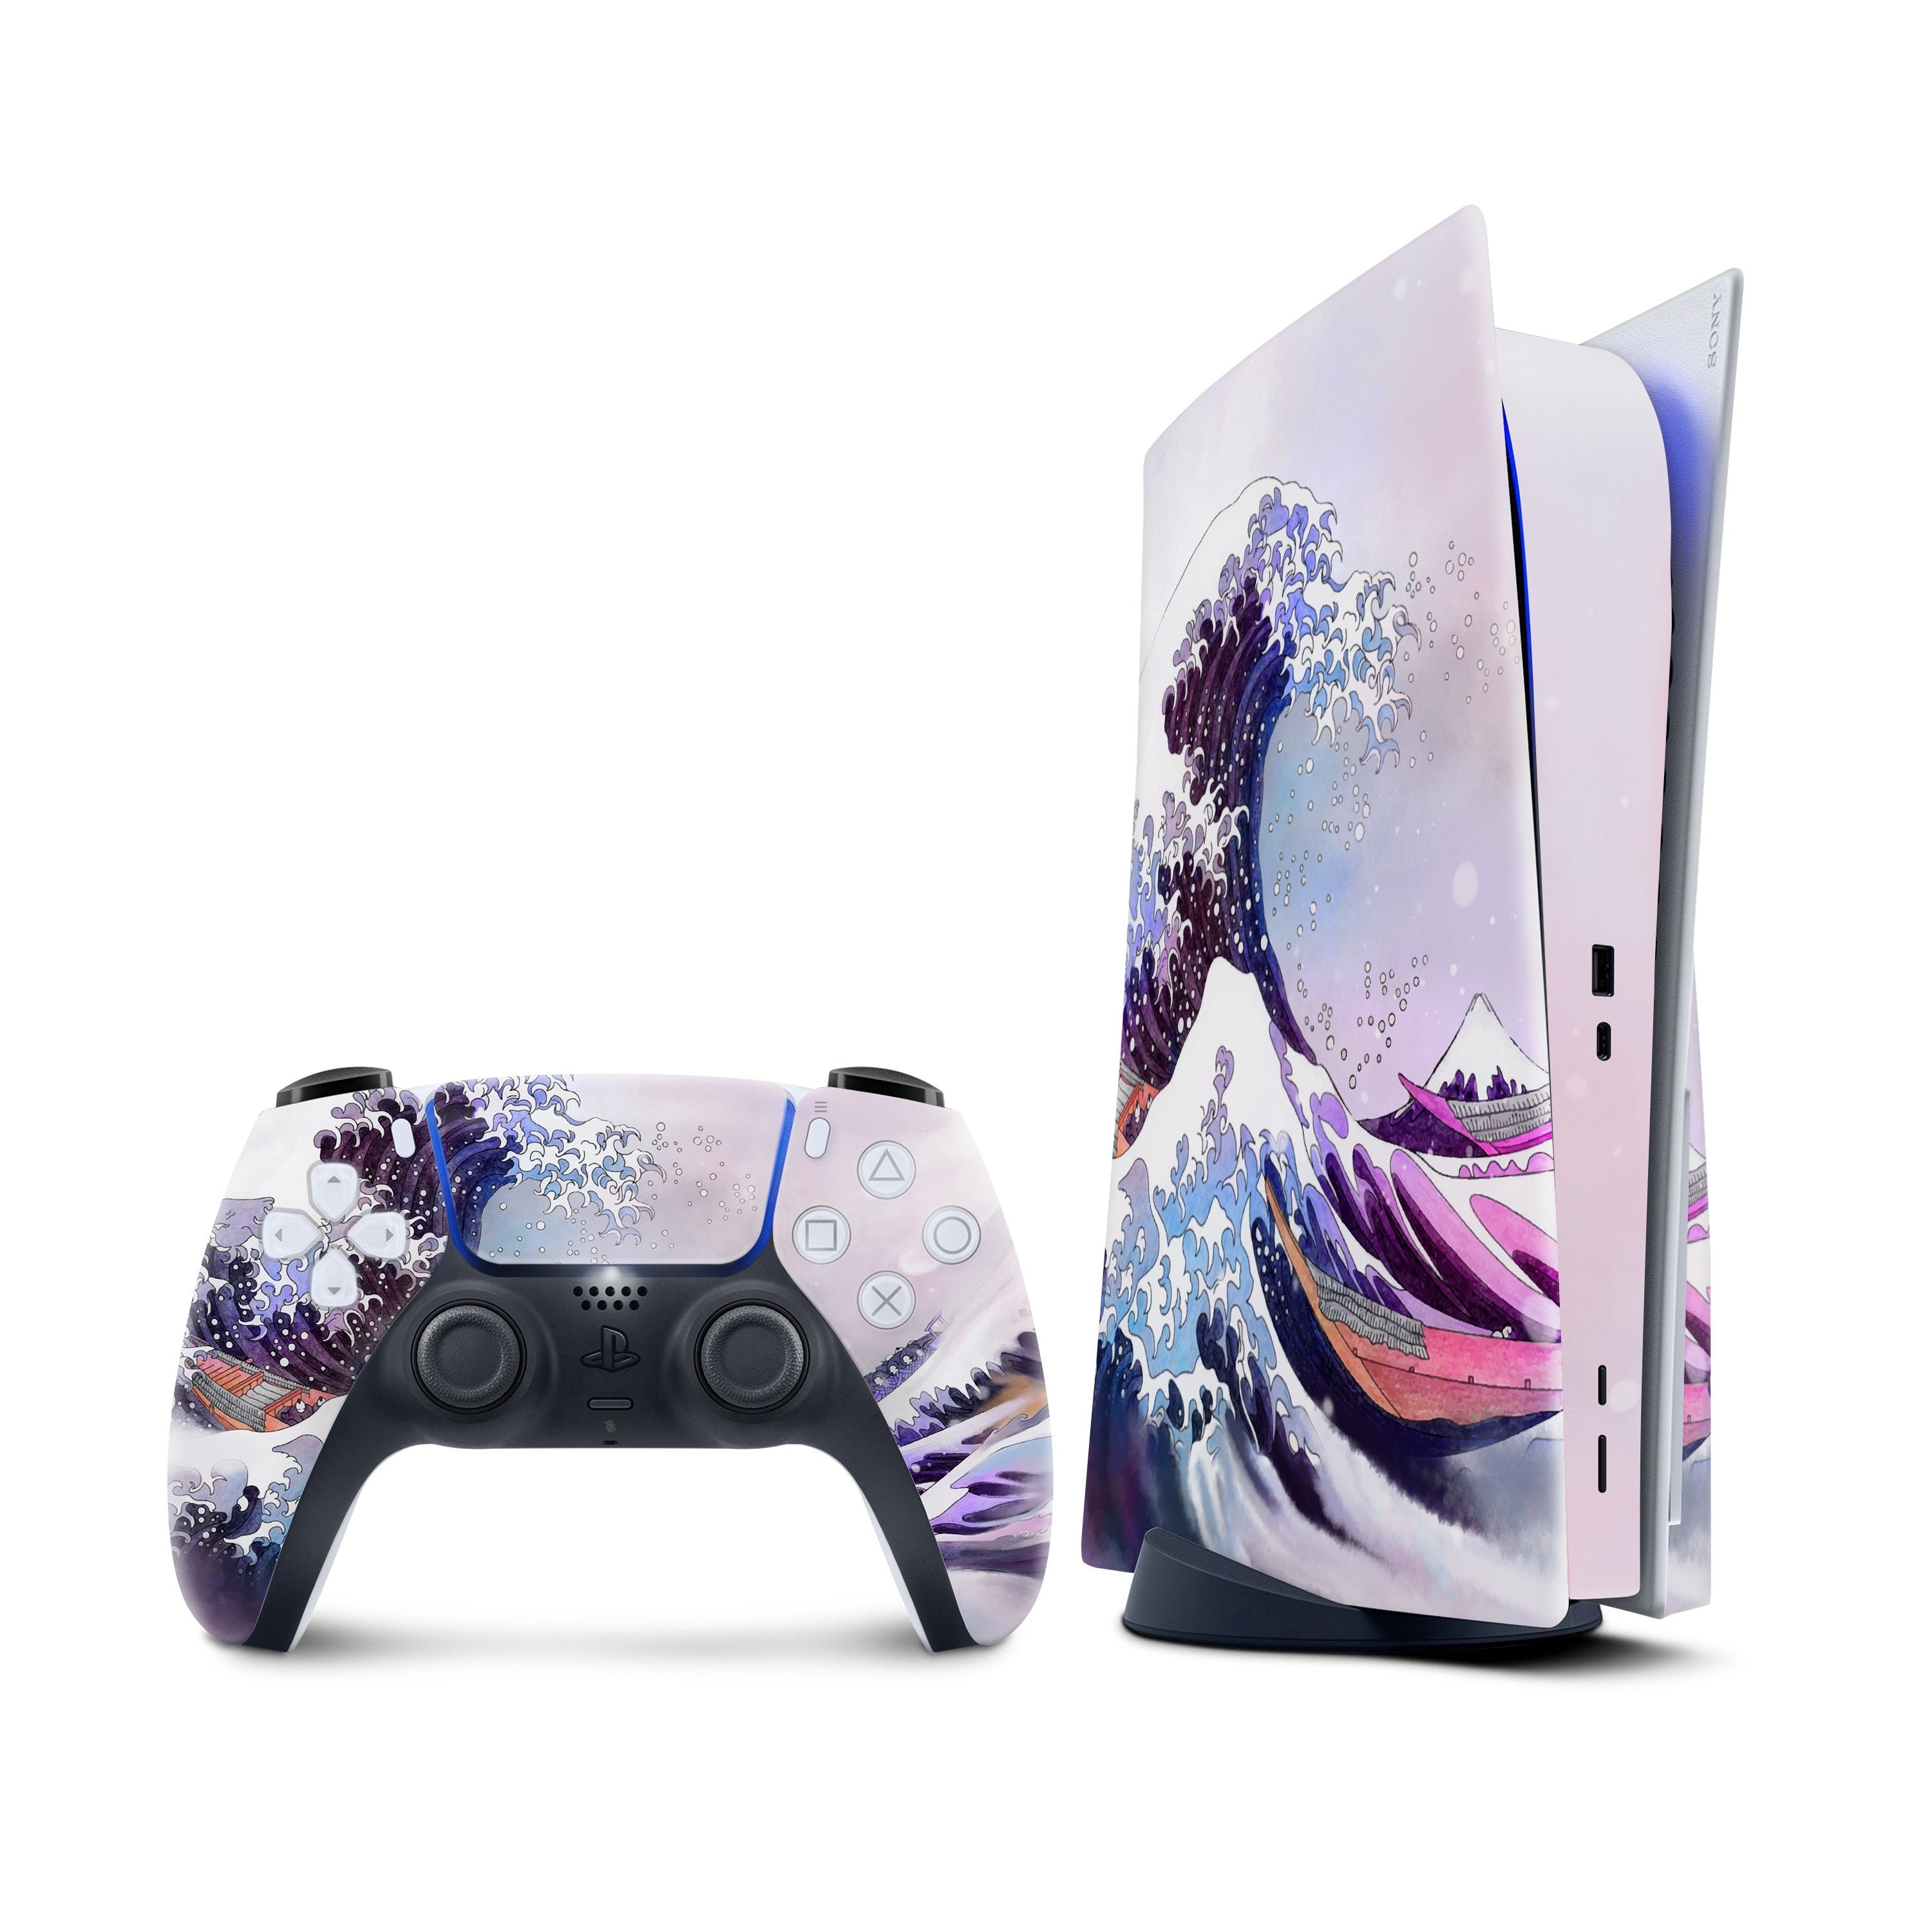  [Regular PS5 Digital Edition] - NOWSKINS Spider - Man PS5 Skin  for Playstation 5, Premium 3M Vinyl Cover Skins Wraps for PS5 Digital  Edition and PS5 Controller Stickers : Video Games